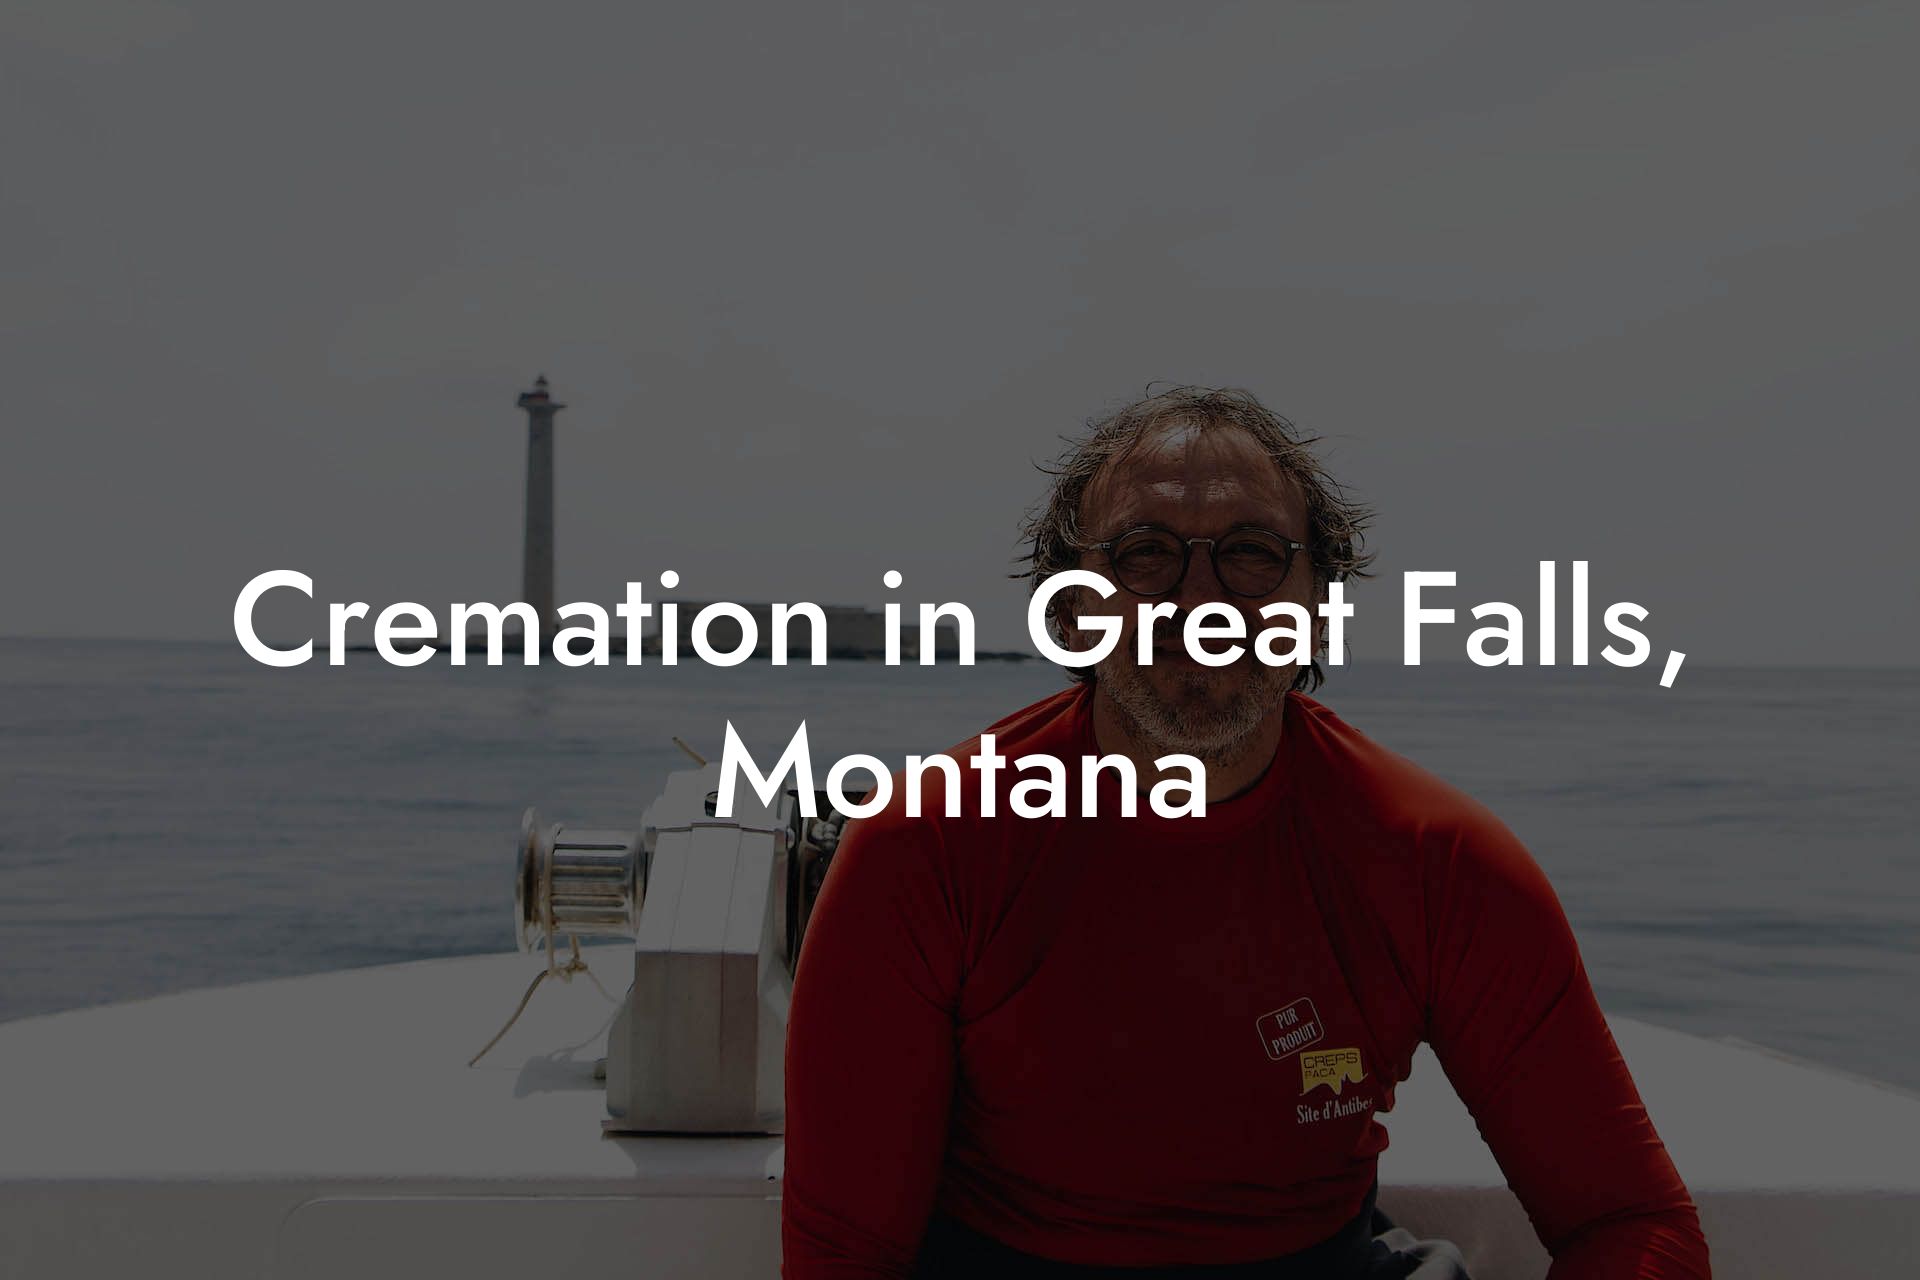 Cremation in Great Falls, Montana